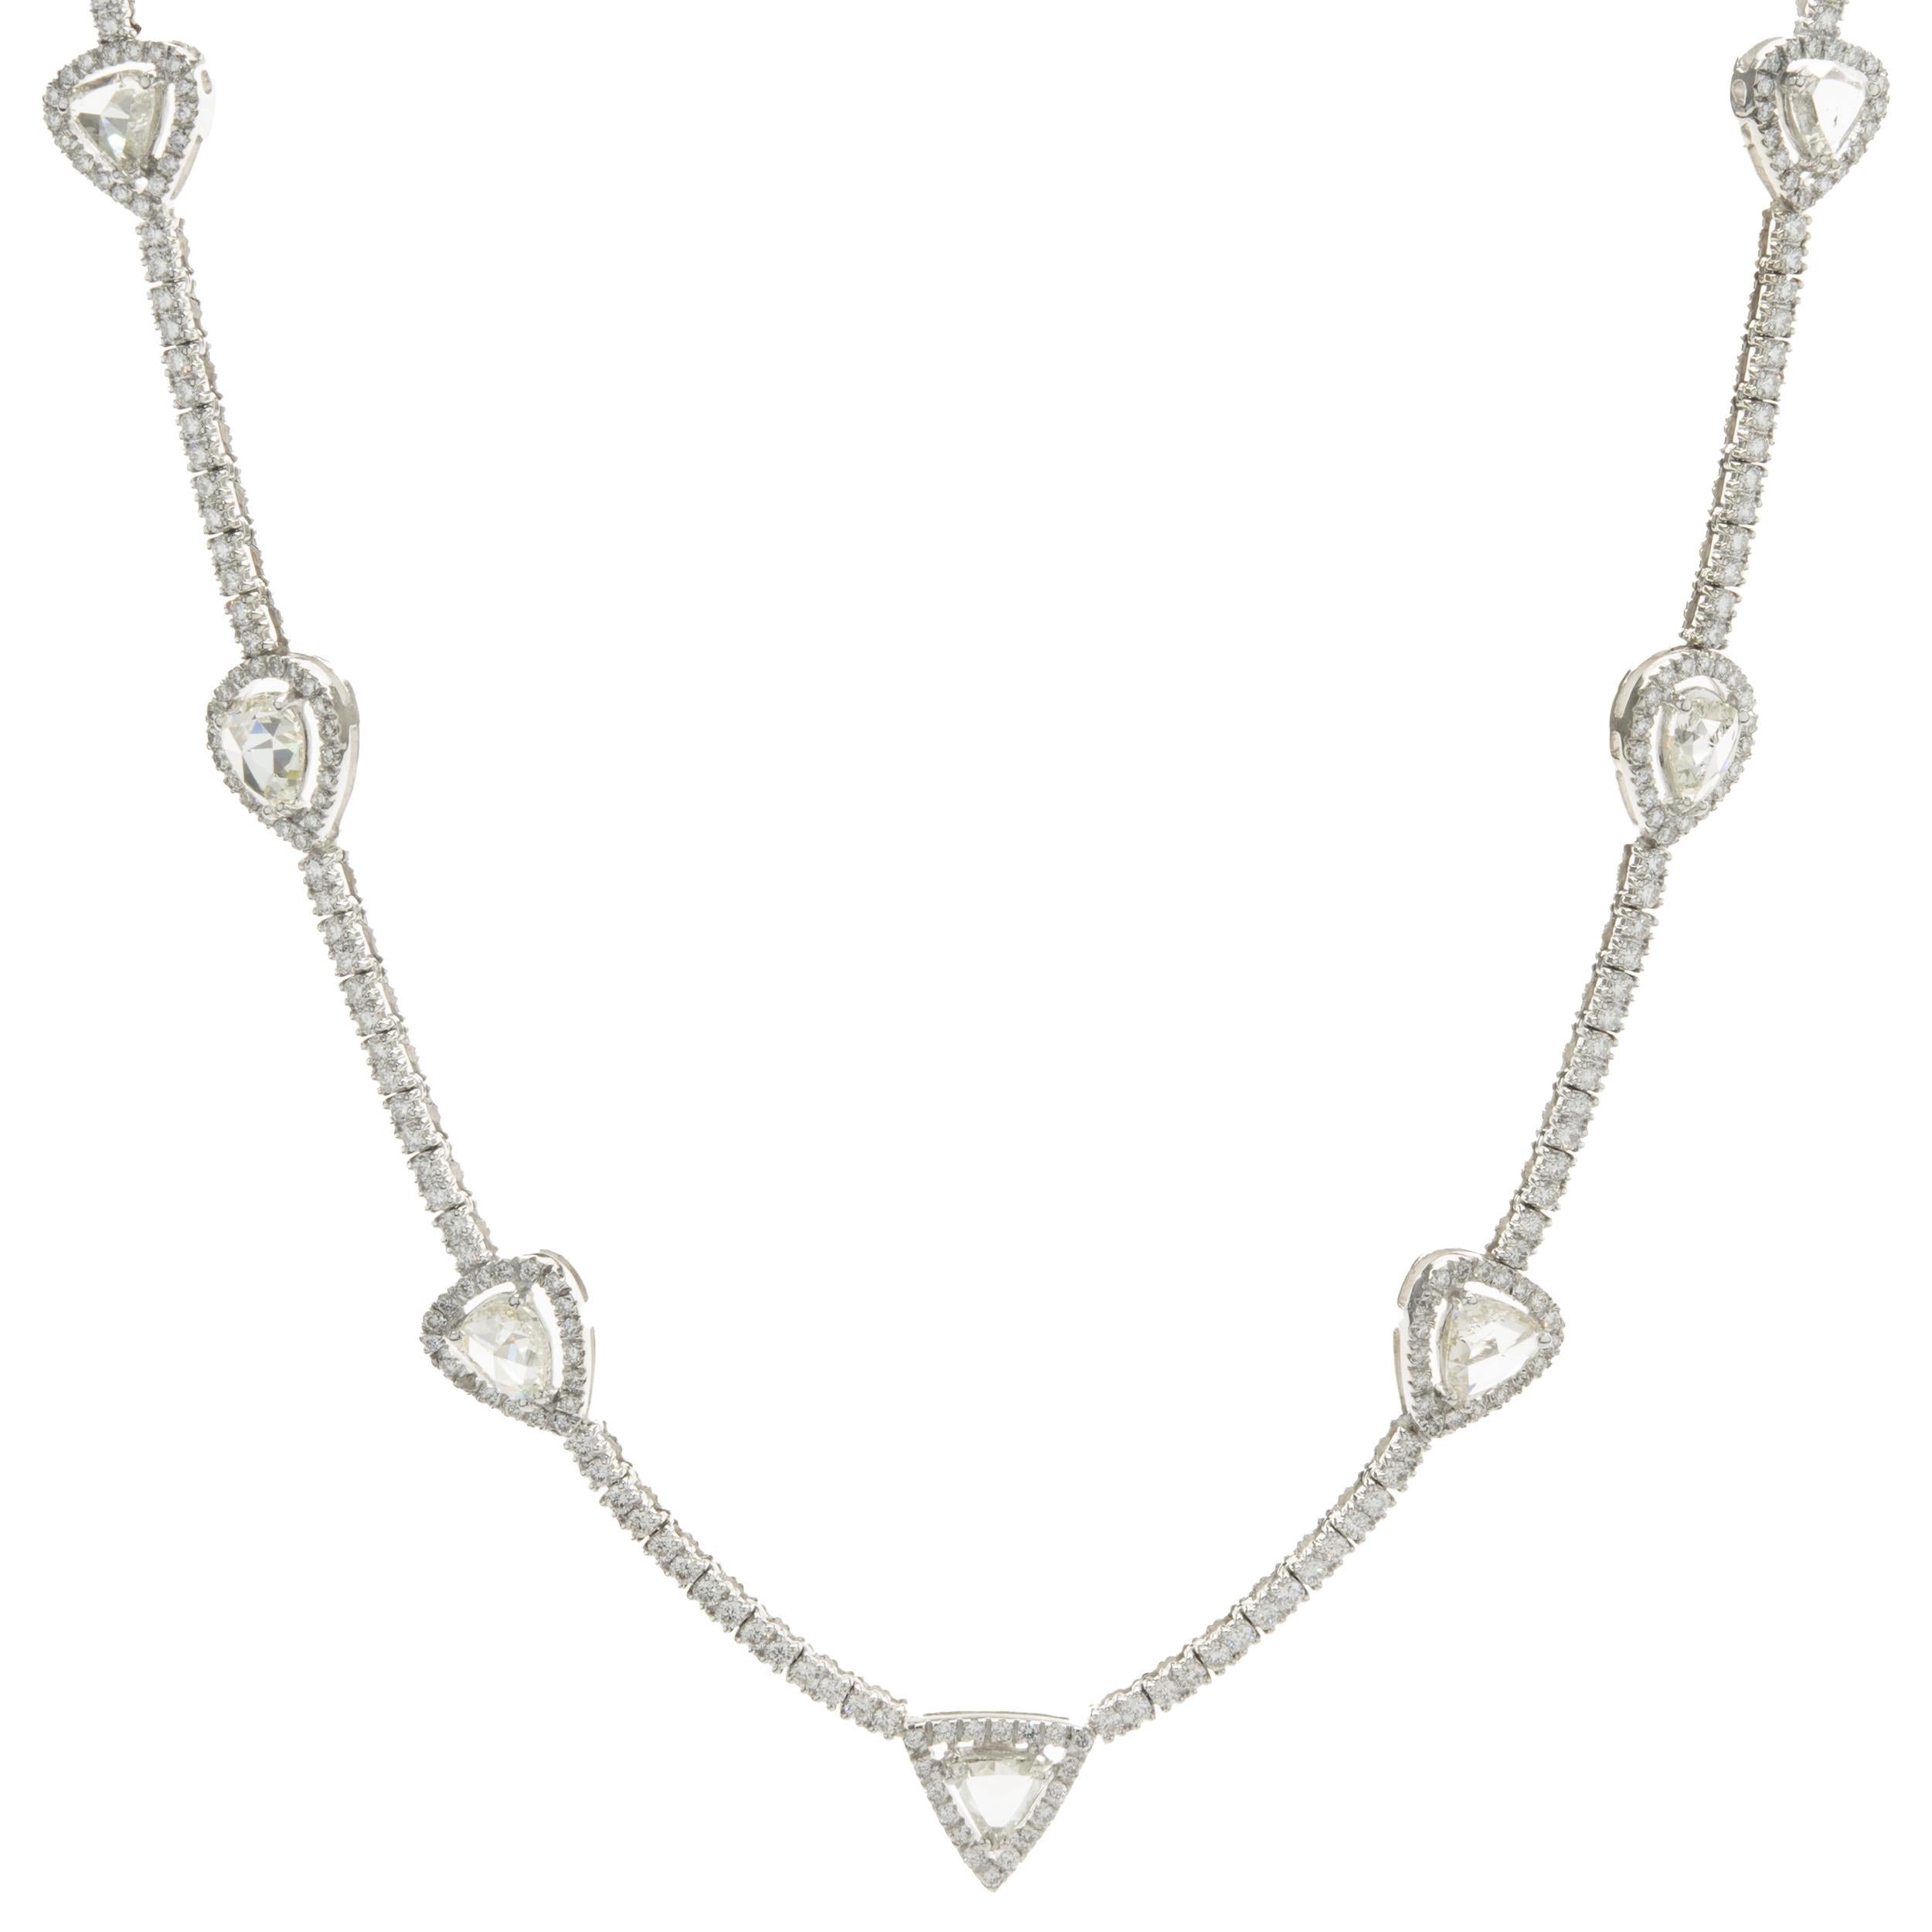 14 Karat White Gold Diamond Tennis Necklace with Rose Cut Diamond Stations For Sale